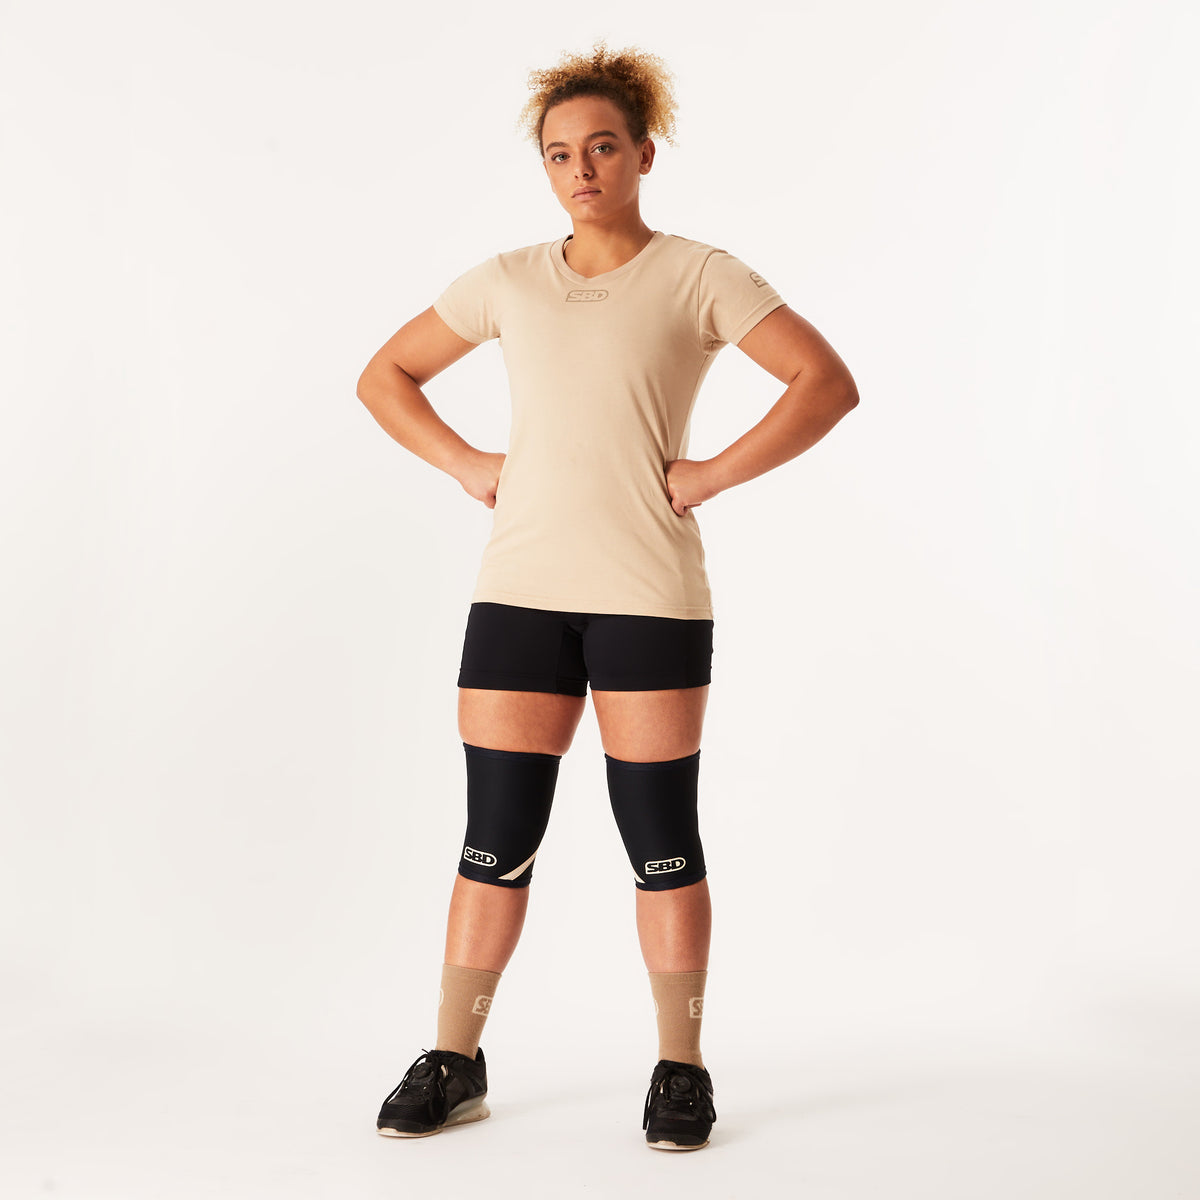 SBD Competition T-Shirt - Defy - Womens